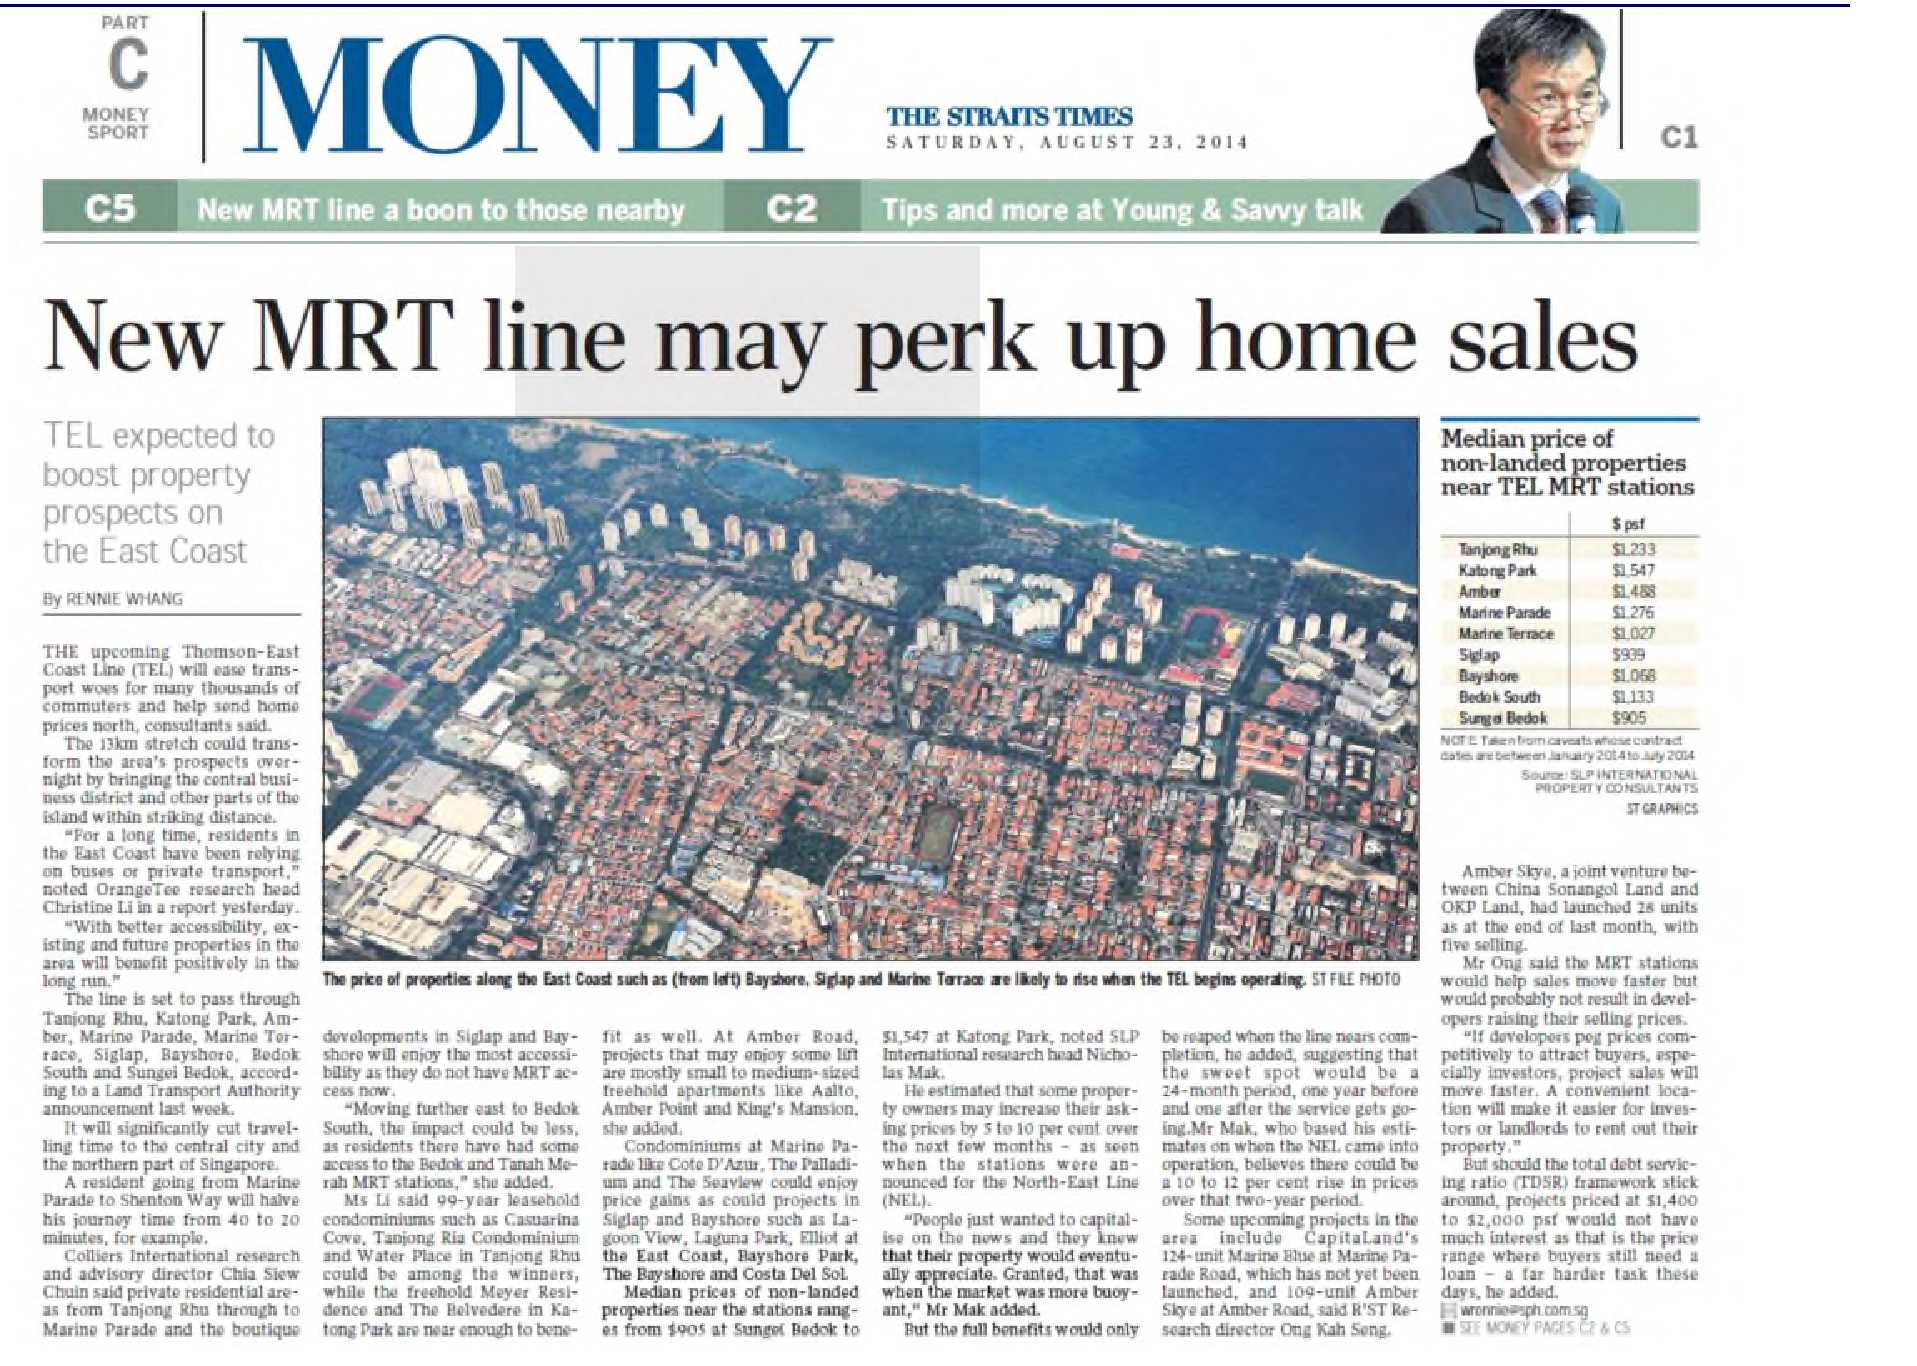 Straits Times - New MRT Line may perk up home sales